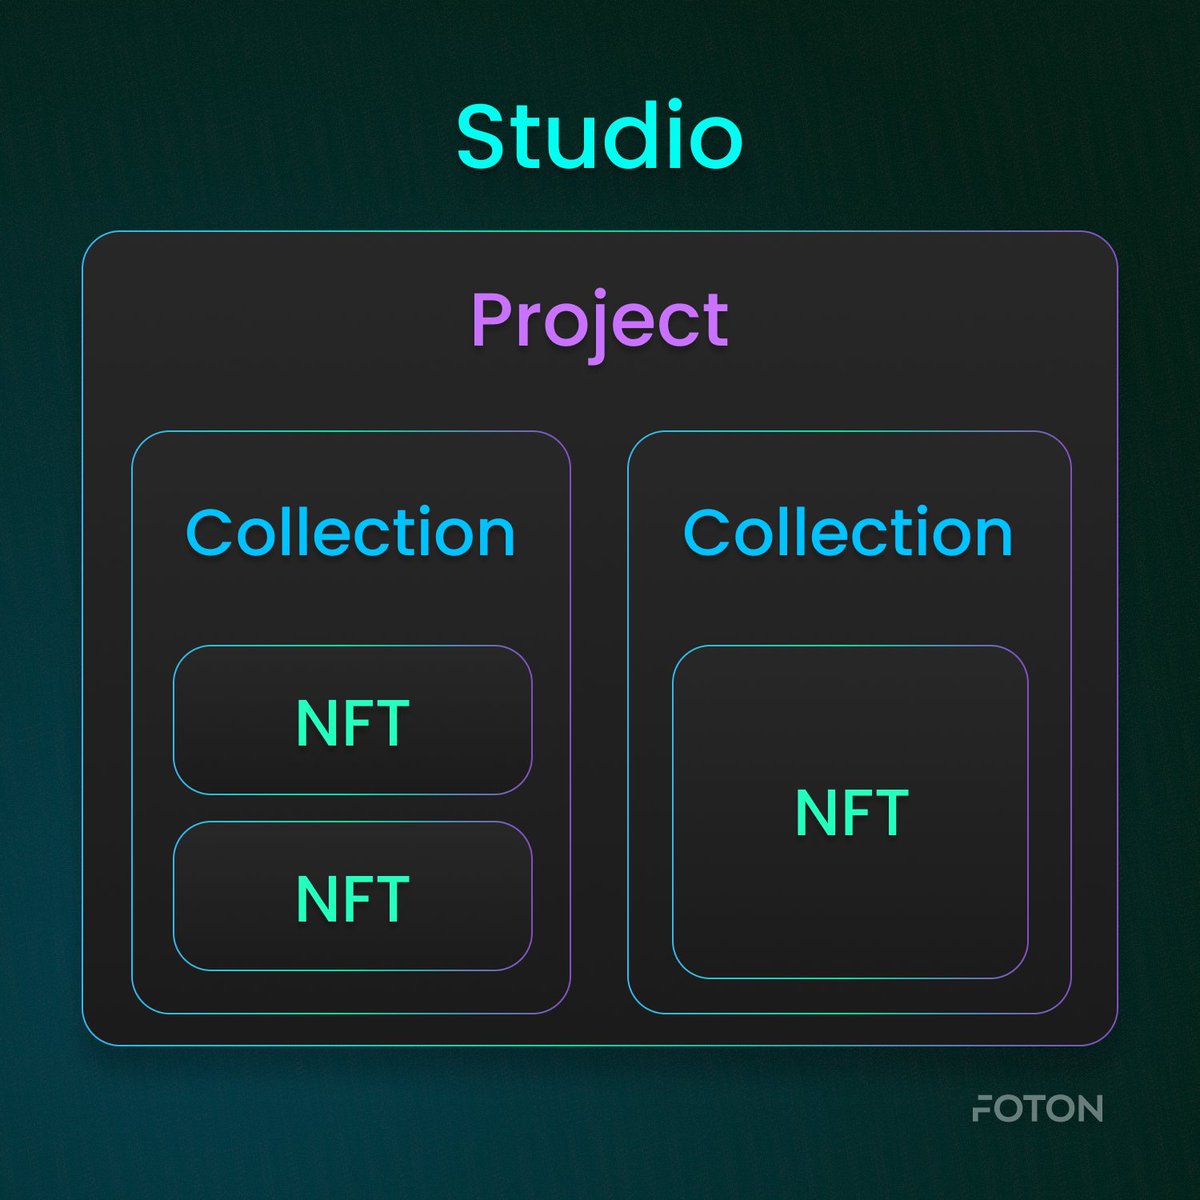 Continuing our round-up of FOTON features, today we'll talk about...

#2 - The #CreatorStudio - a pinnacle of #NFT creation

The Studio is a dedicated set of Tools to create and manage NFTs without coding knowledge. It is an environment for collaboration and has a pre-established